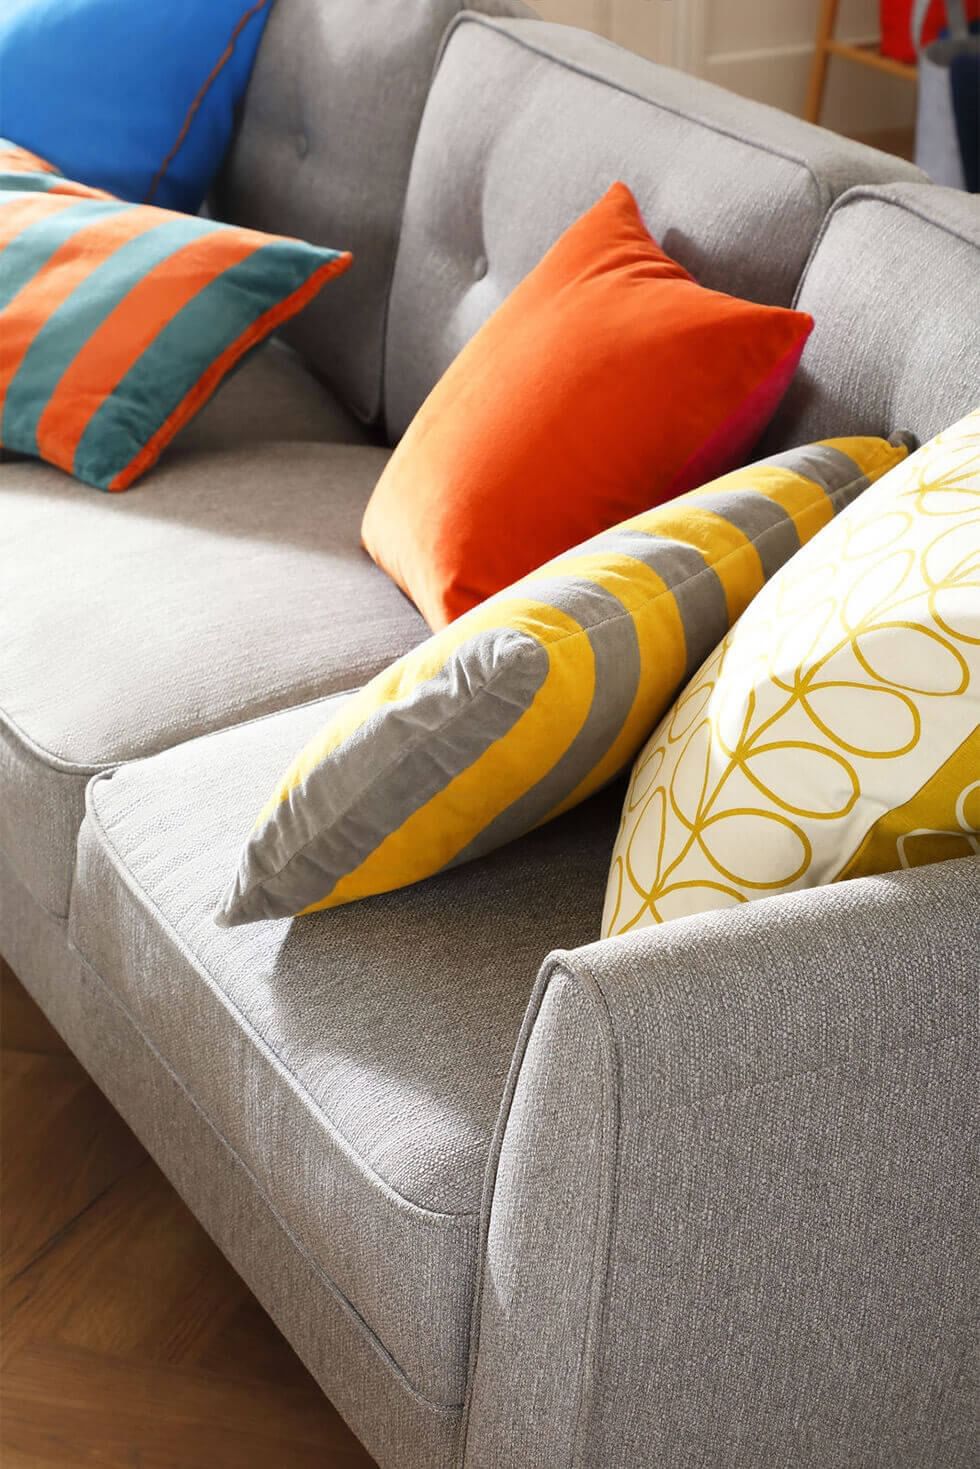 Grey fabric sofa with colourful cushions in bold patterns